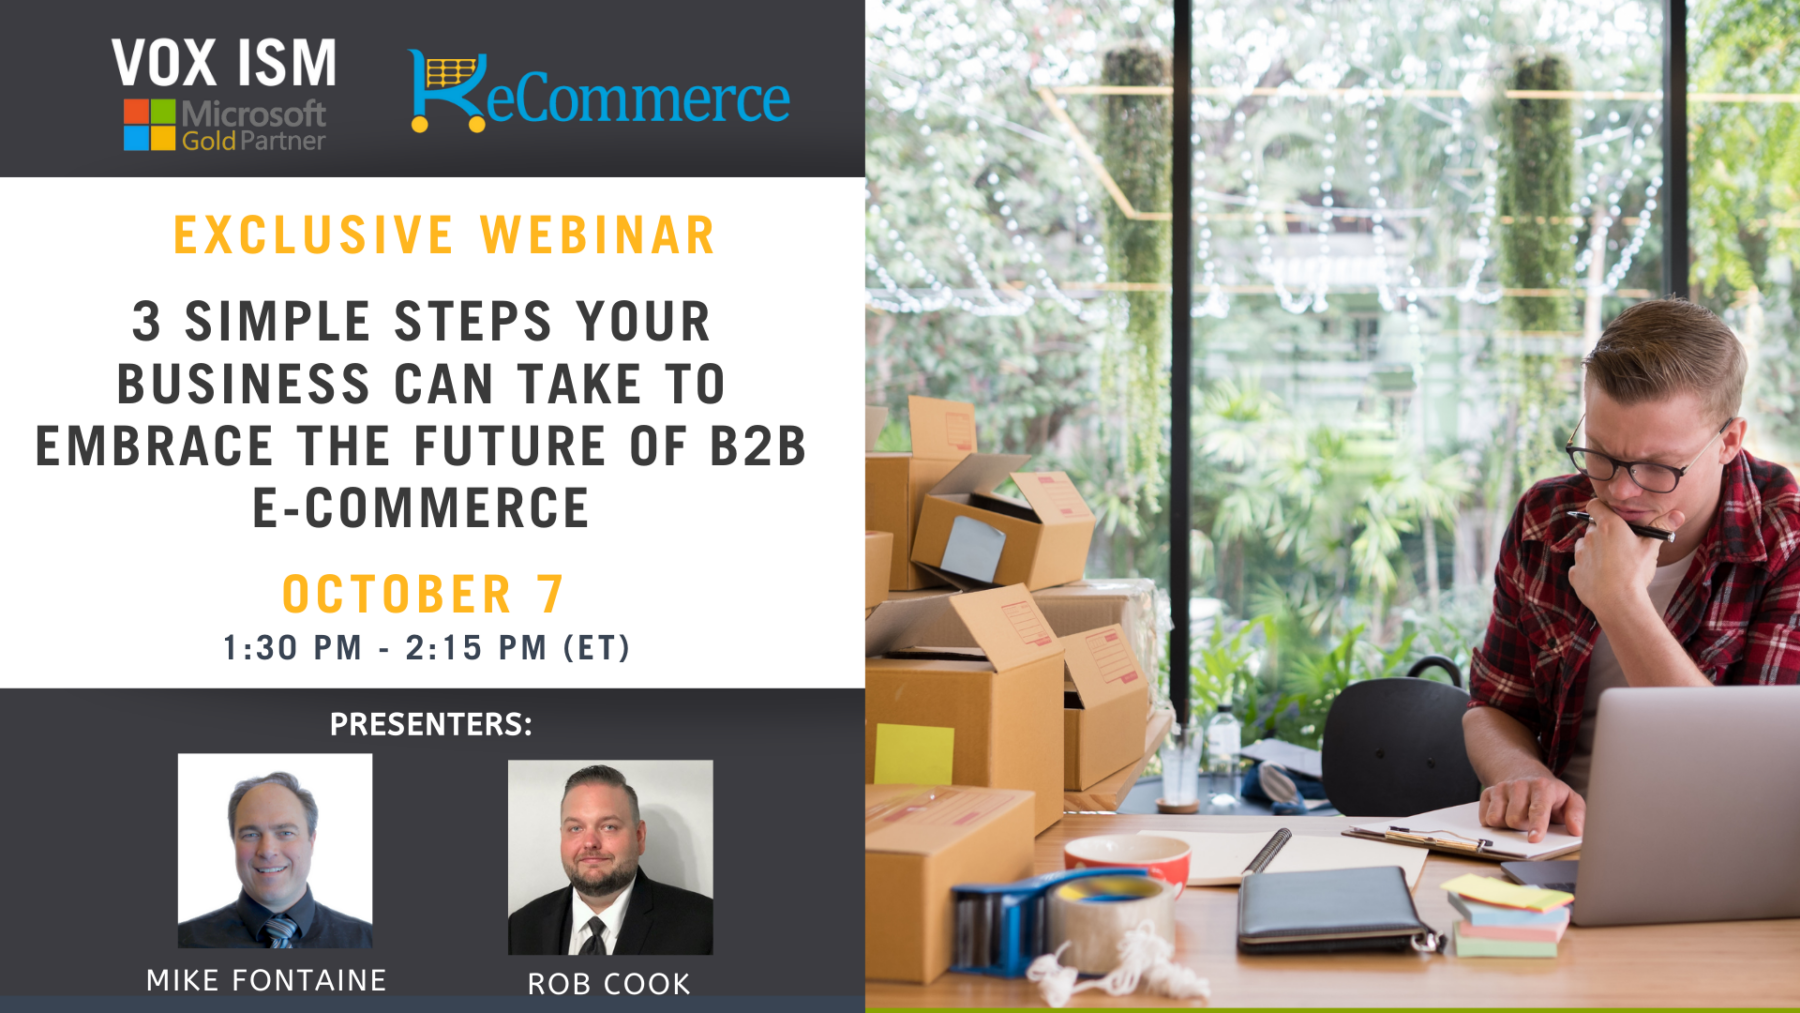 3 Simple Steps Your Business Can Take to Embrace the Future of B2B E-Commerce